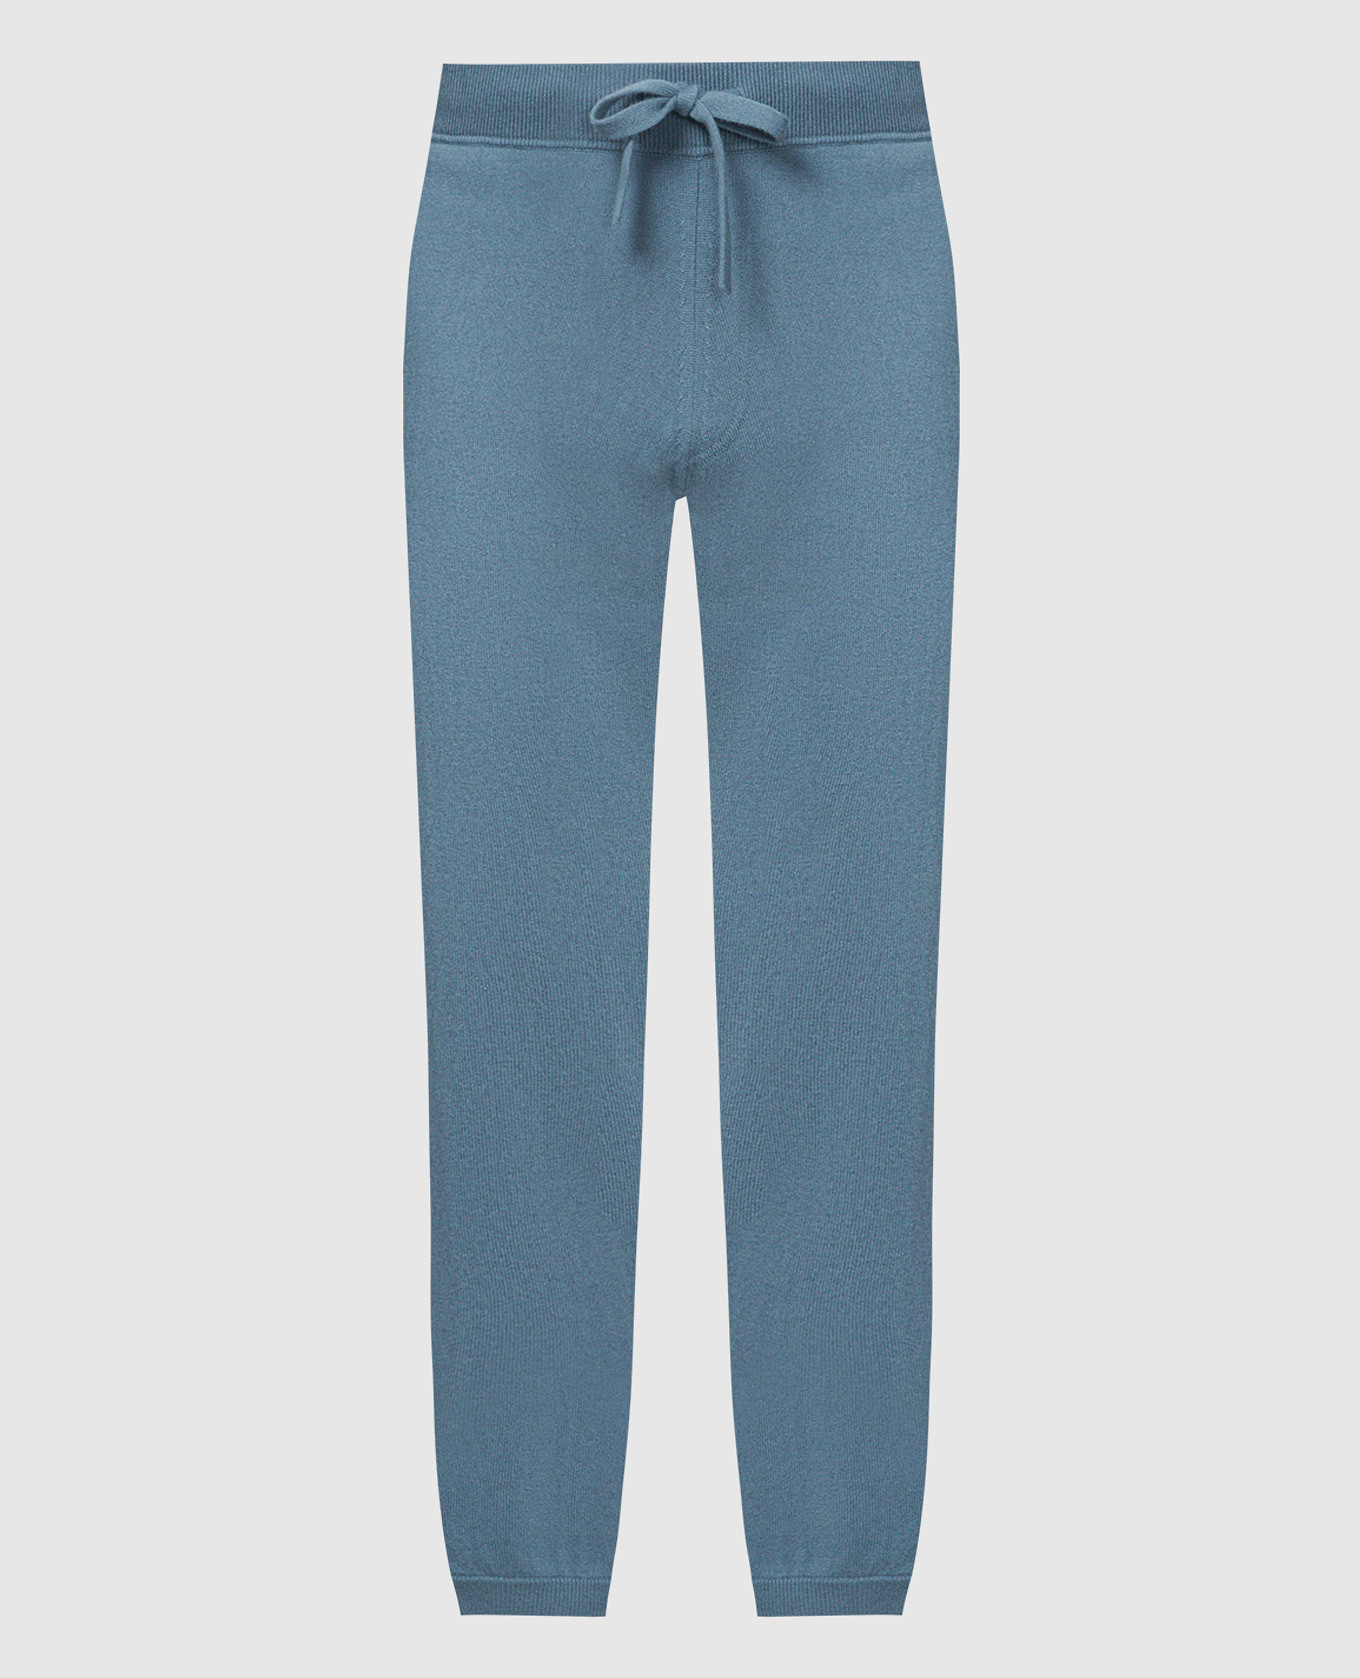 Blue wool and cashmere joggers